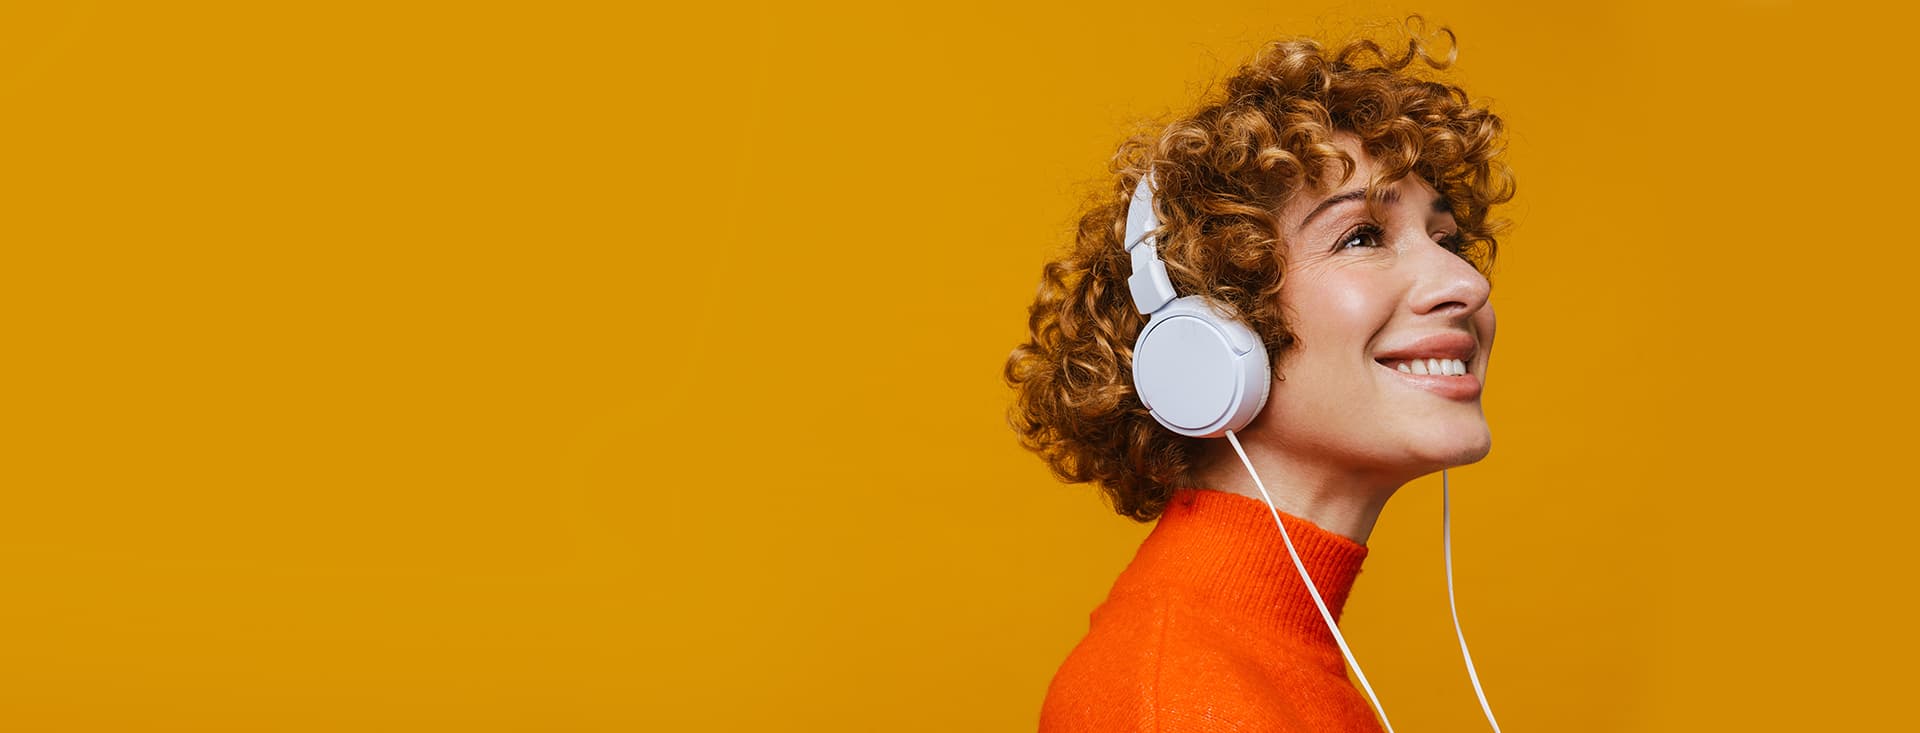 Audiobooks come to life through Bluetooth, headphones, or Dolby Atmos-enhanced speakers.